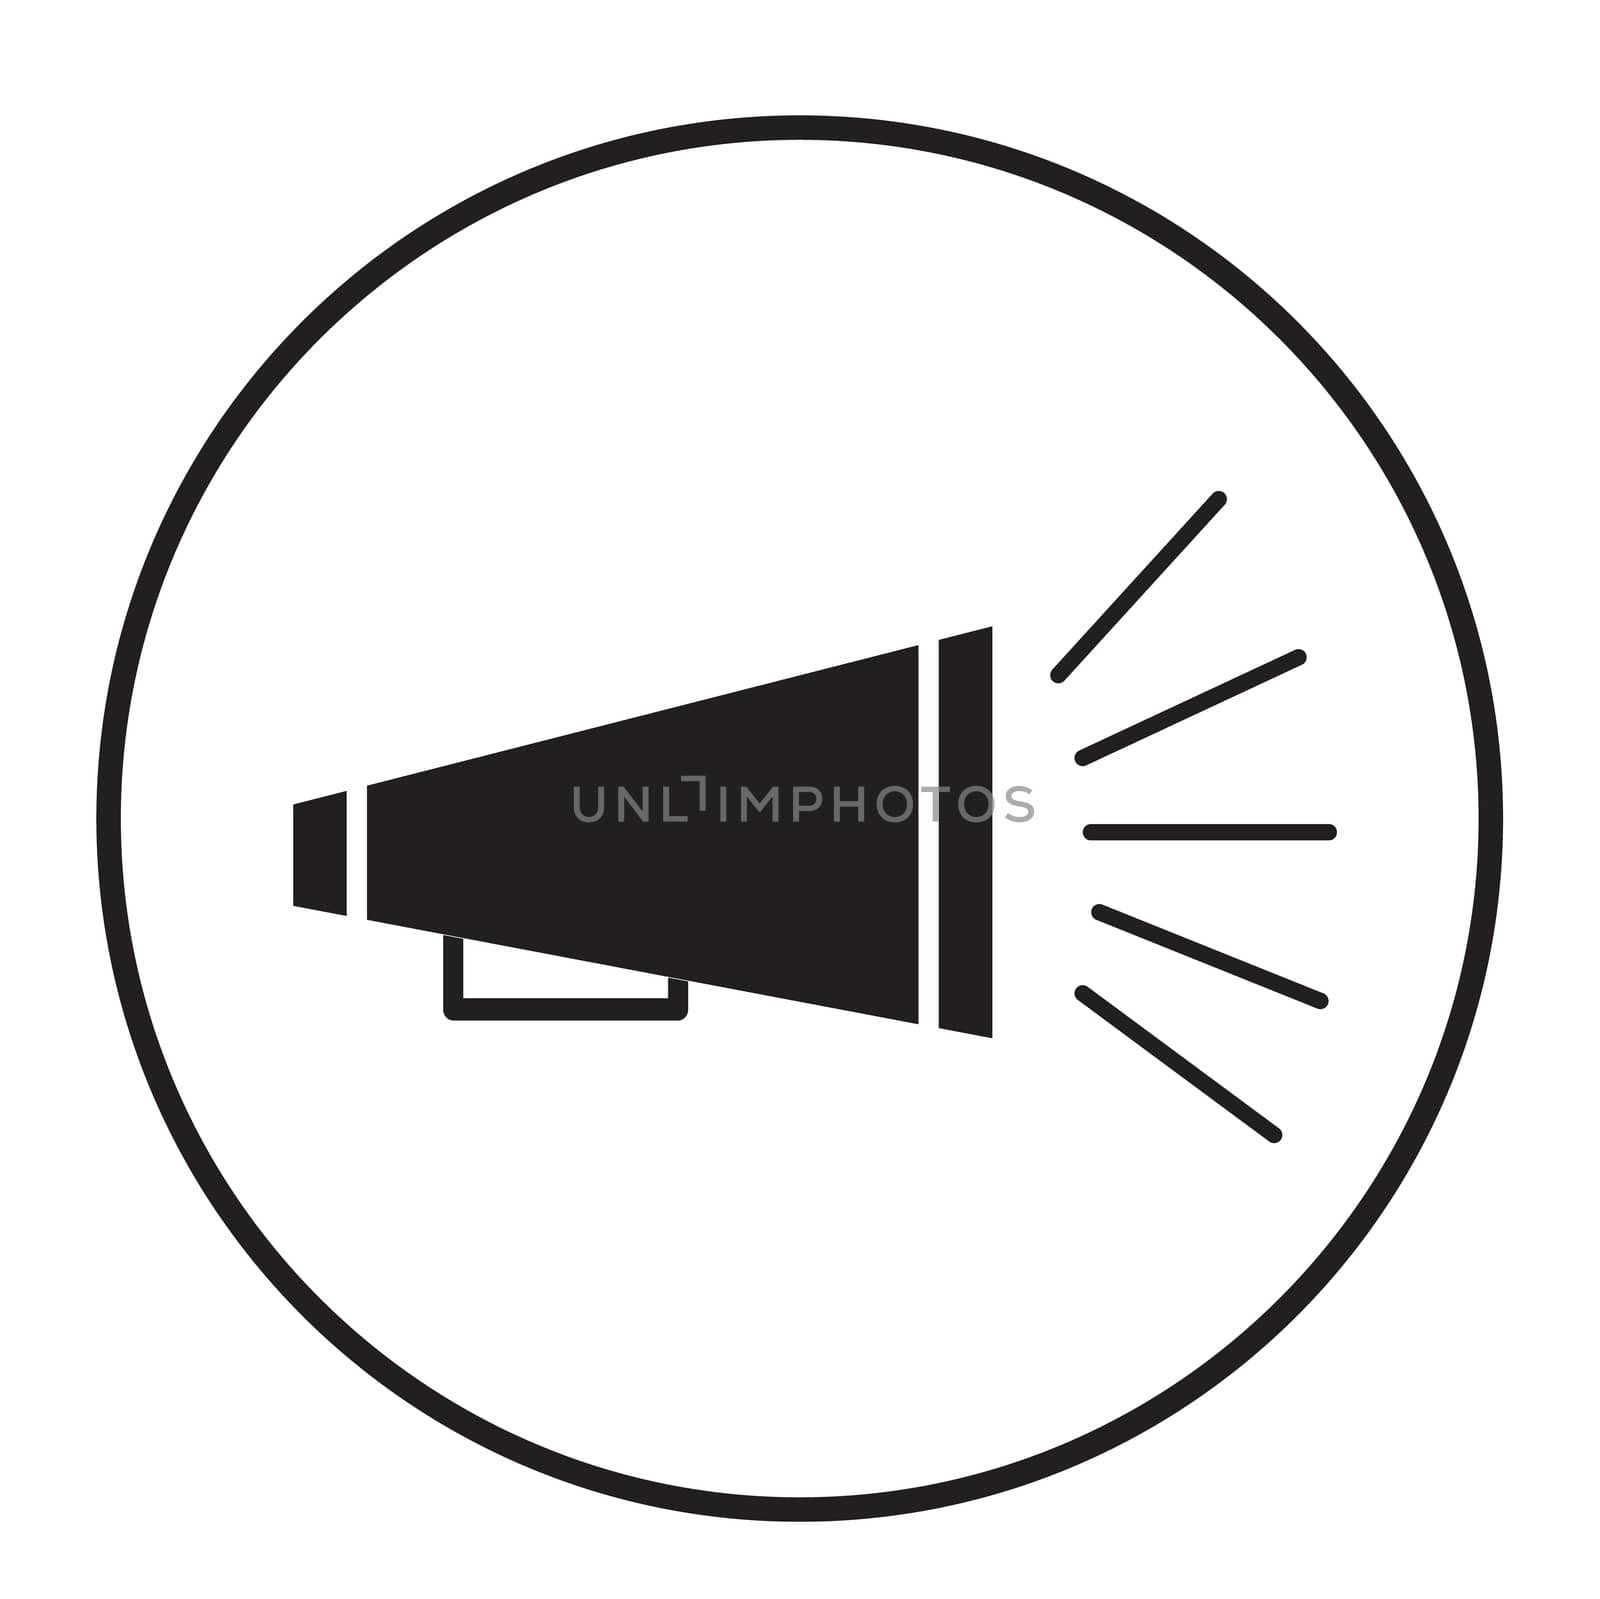 bullhorn icon on white background. Announce sign. bullhorn icon for your web site design, logo, app, UI. flat style.